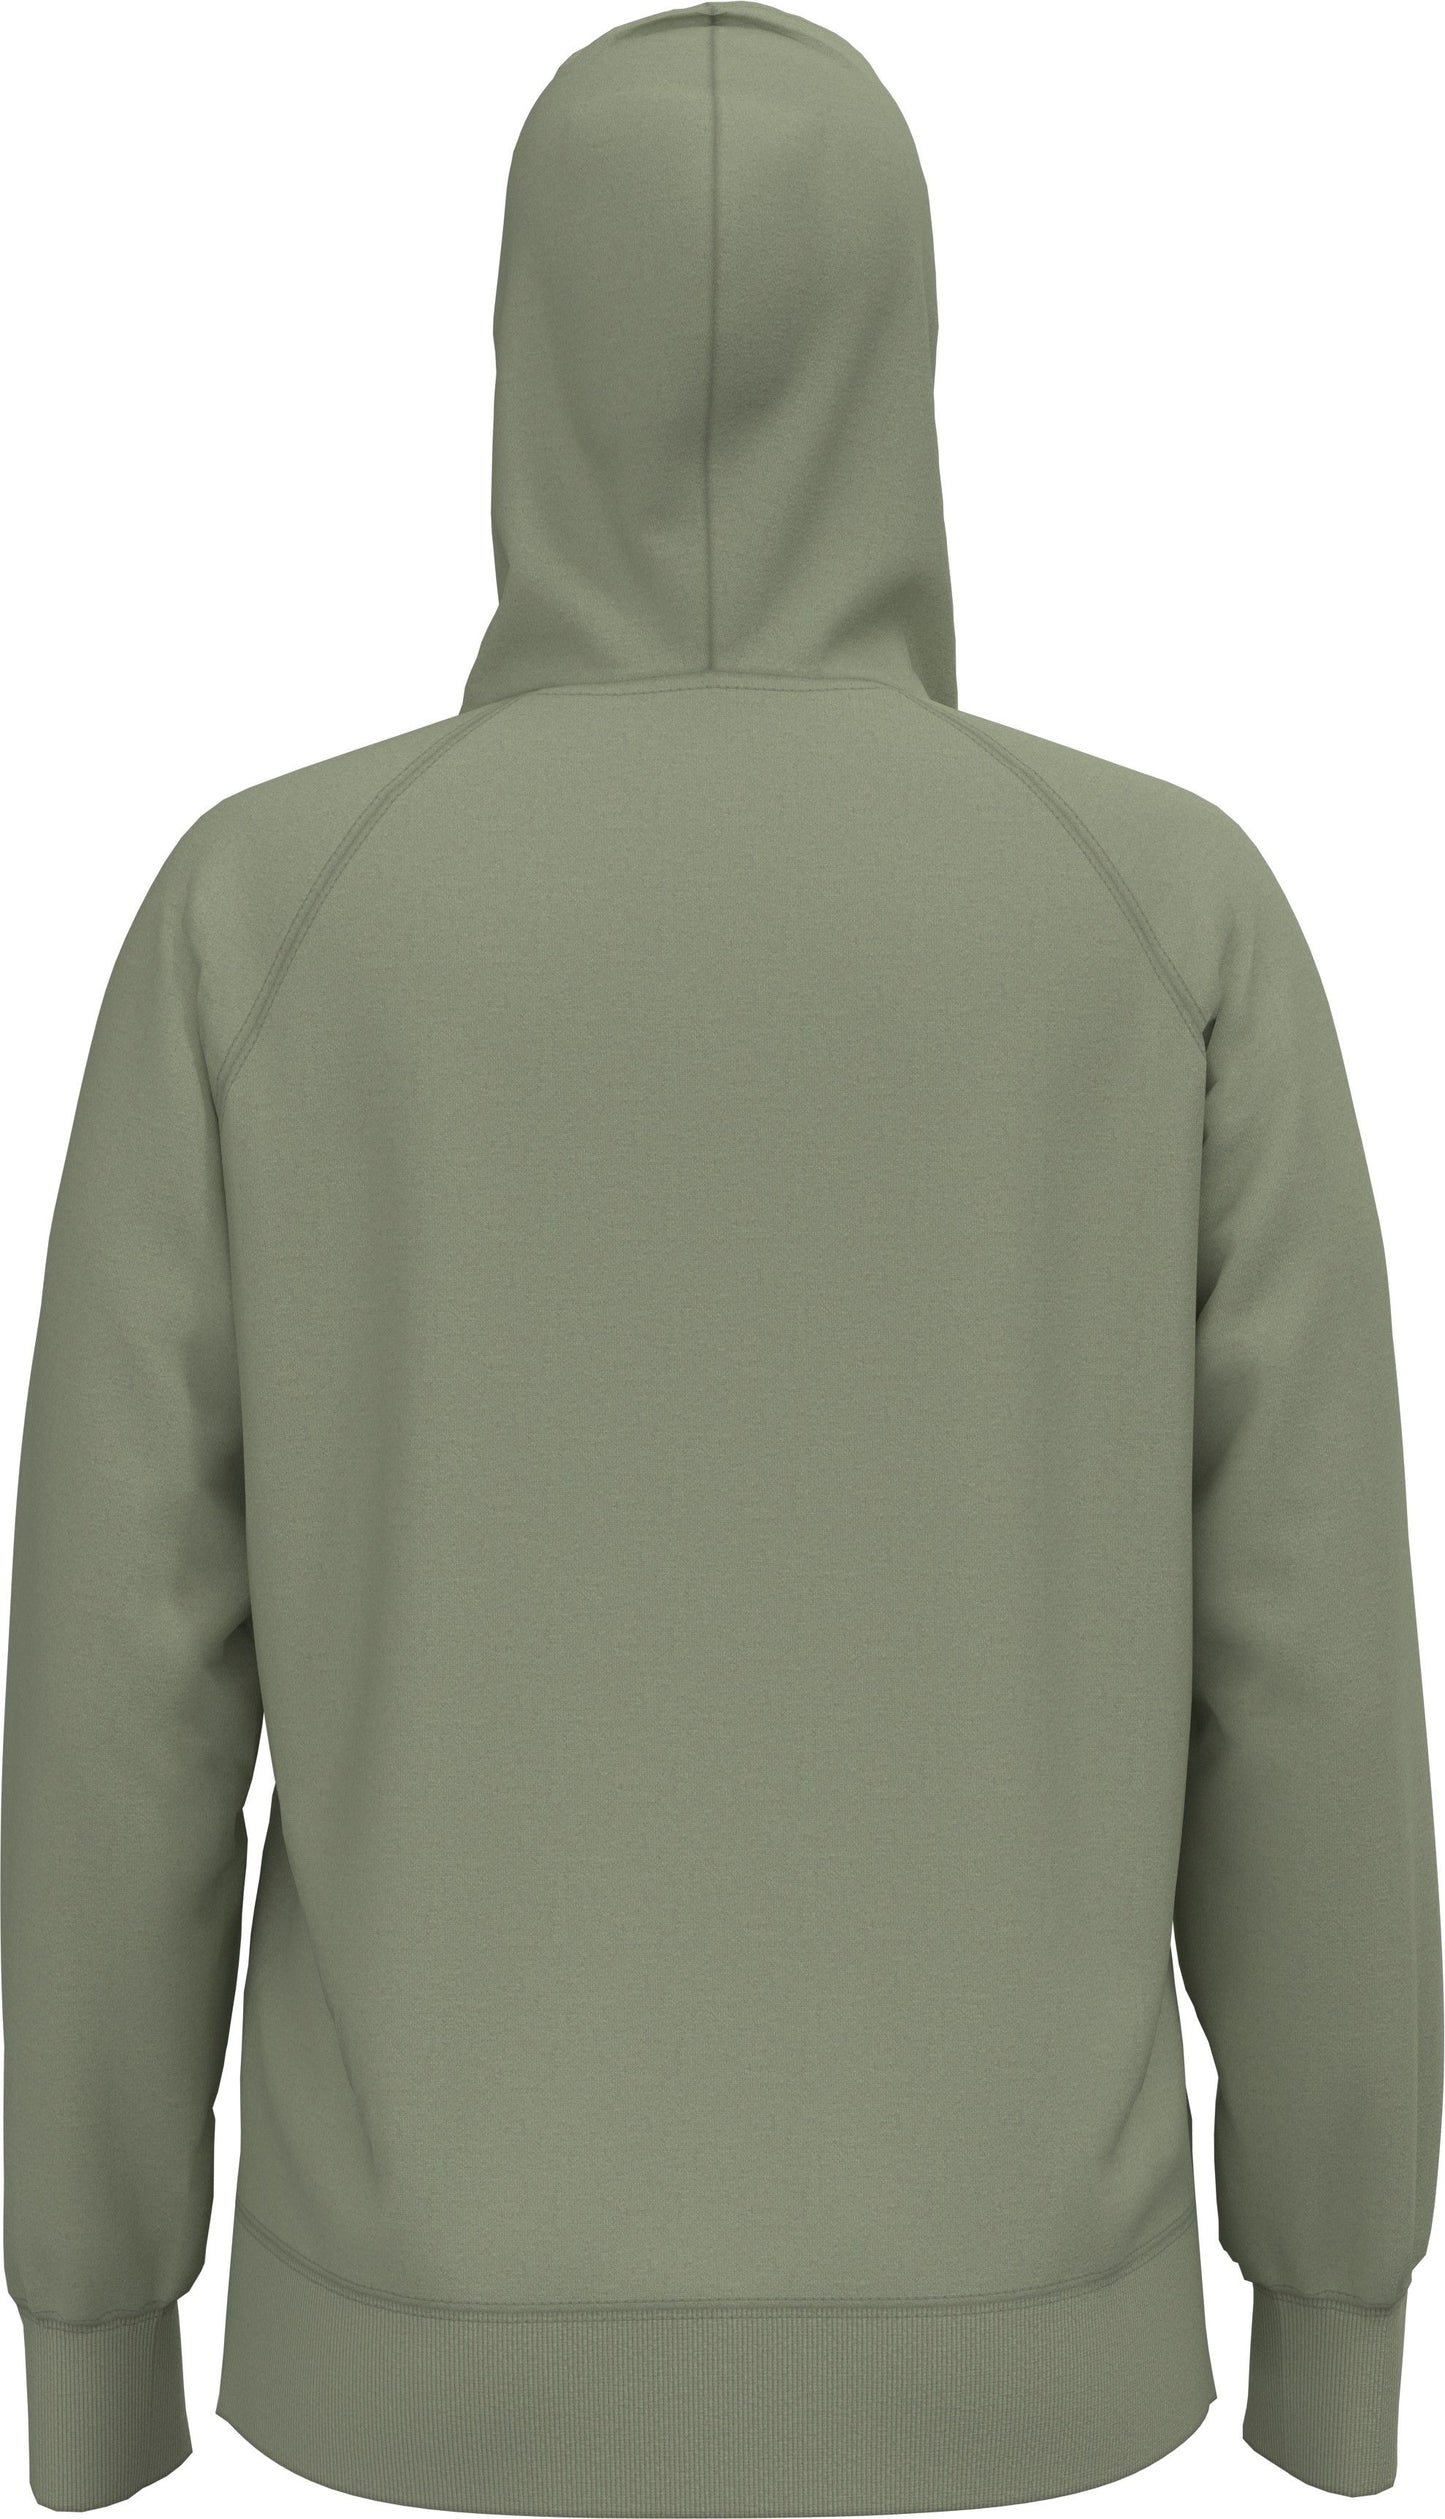 The North Face Apparel Women's Half Dome Pullover Hoodie Tea Green